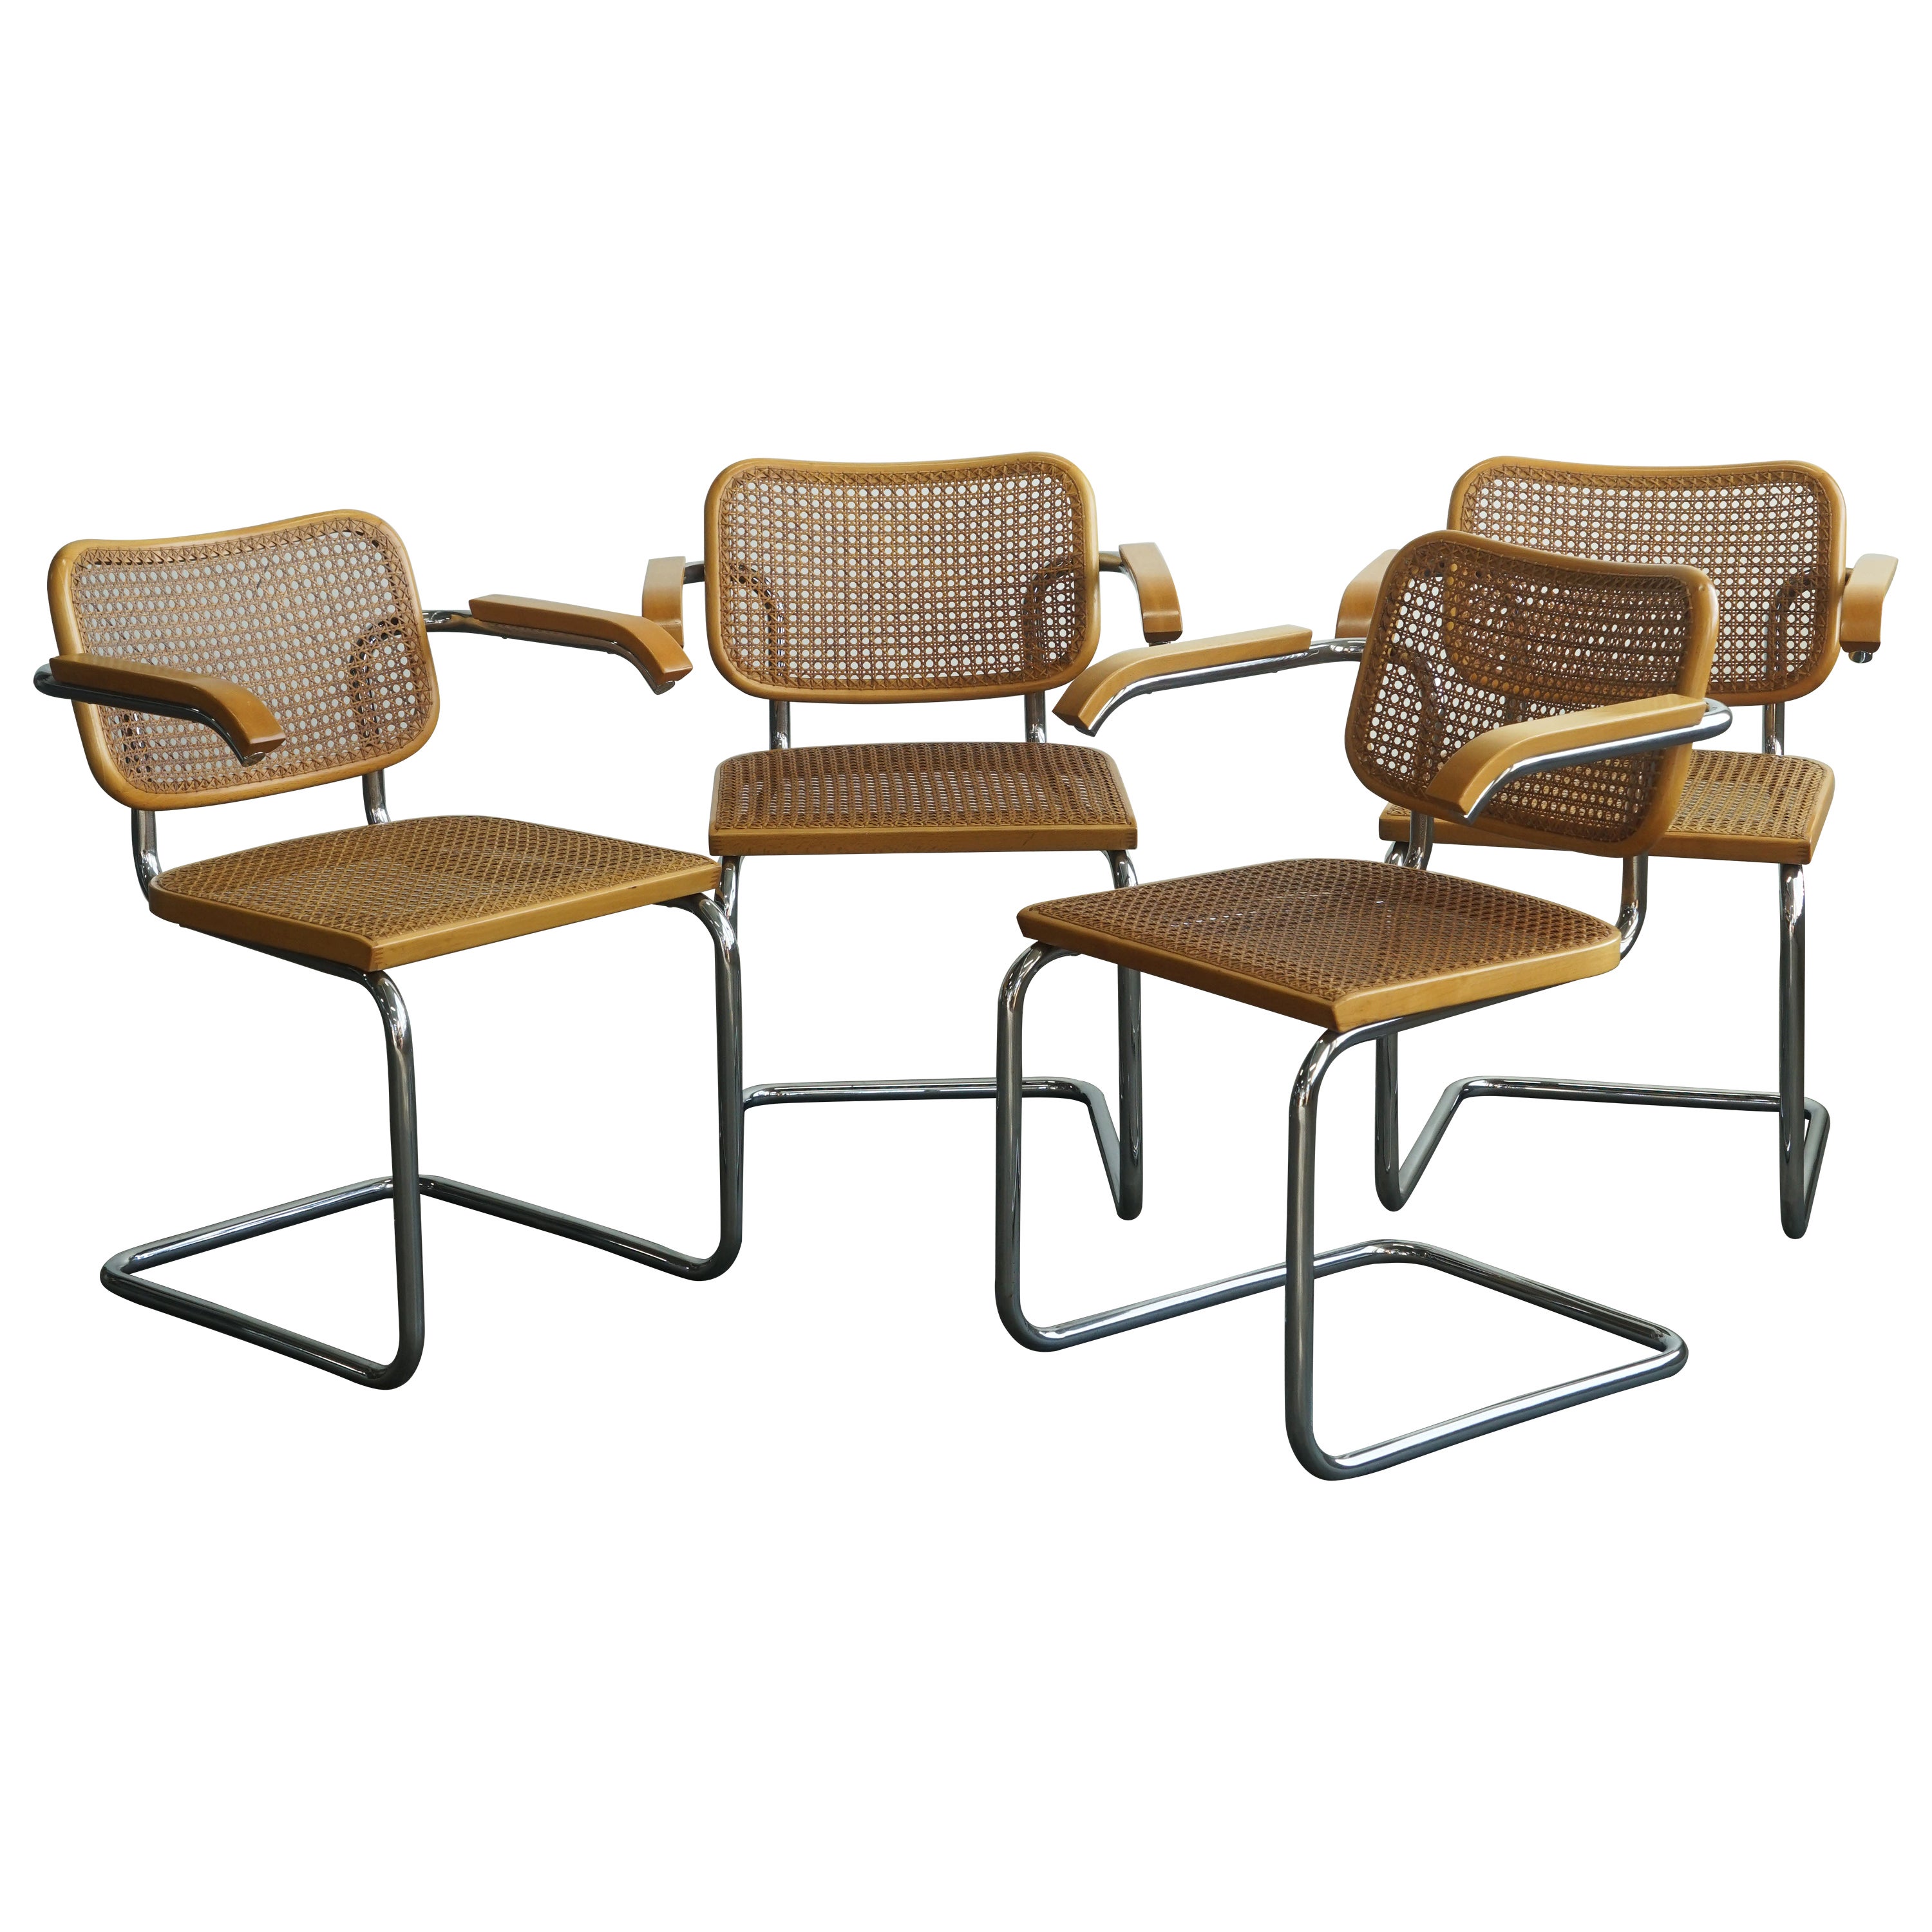 Set of 4 1960's Marcel Breuer Cesca chairs with arms, Stendig labels